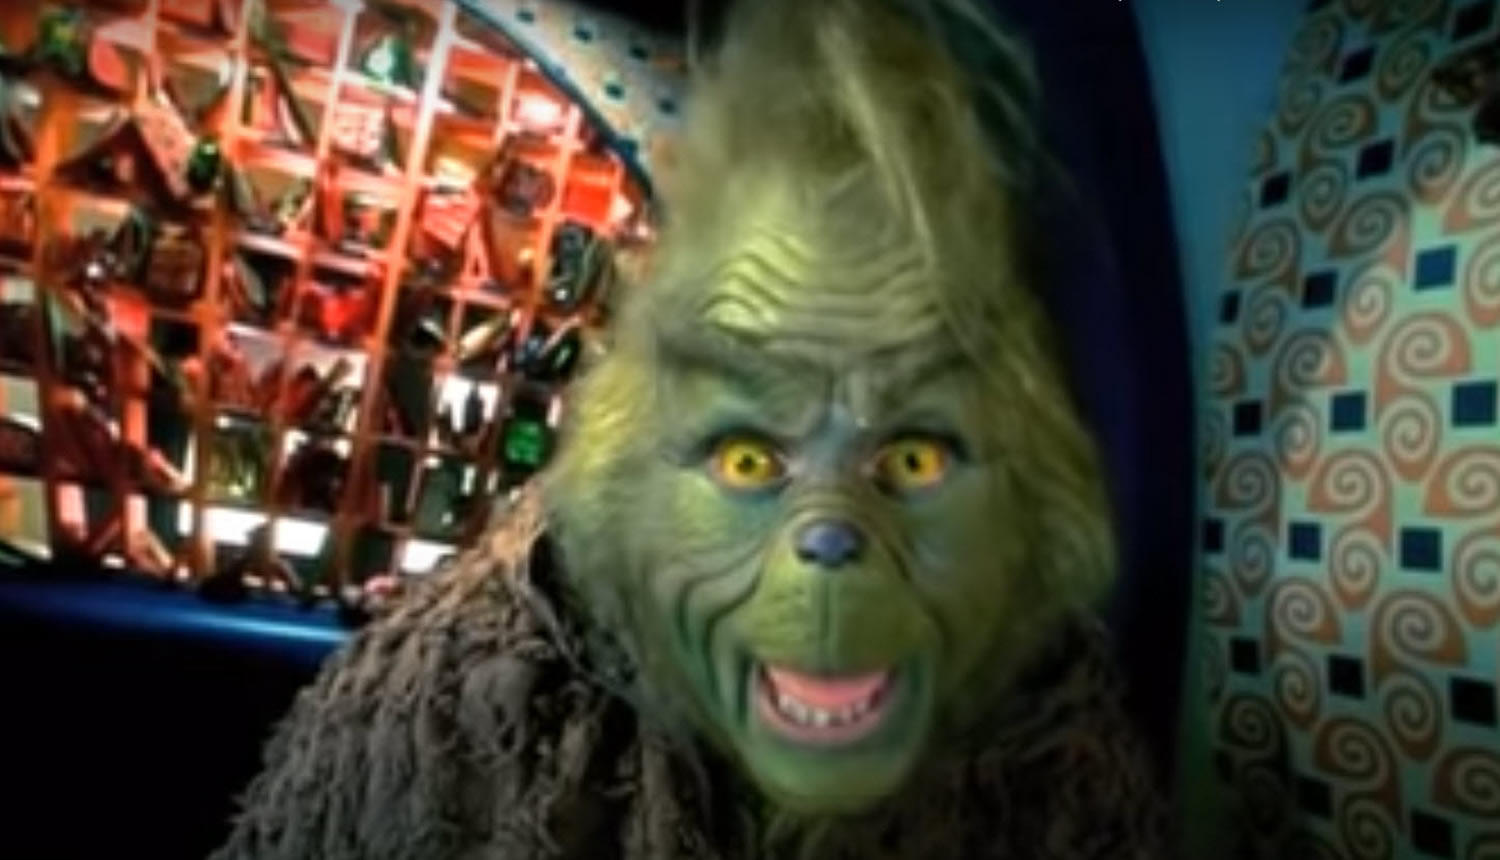 Is Jim Carrey Ready to Reprise His Role in a New 'The Grinch' Sequel?